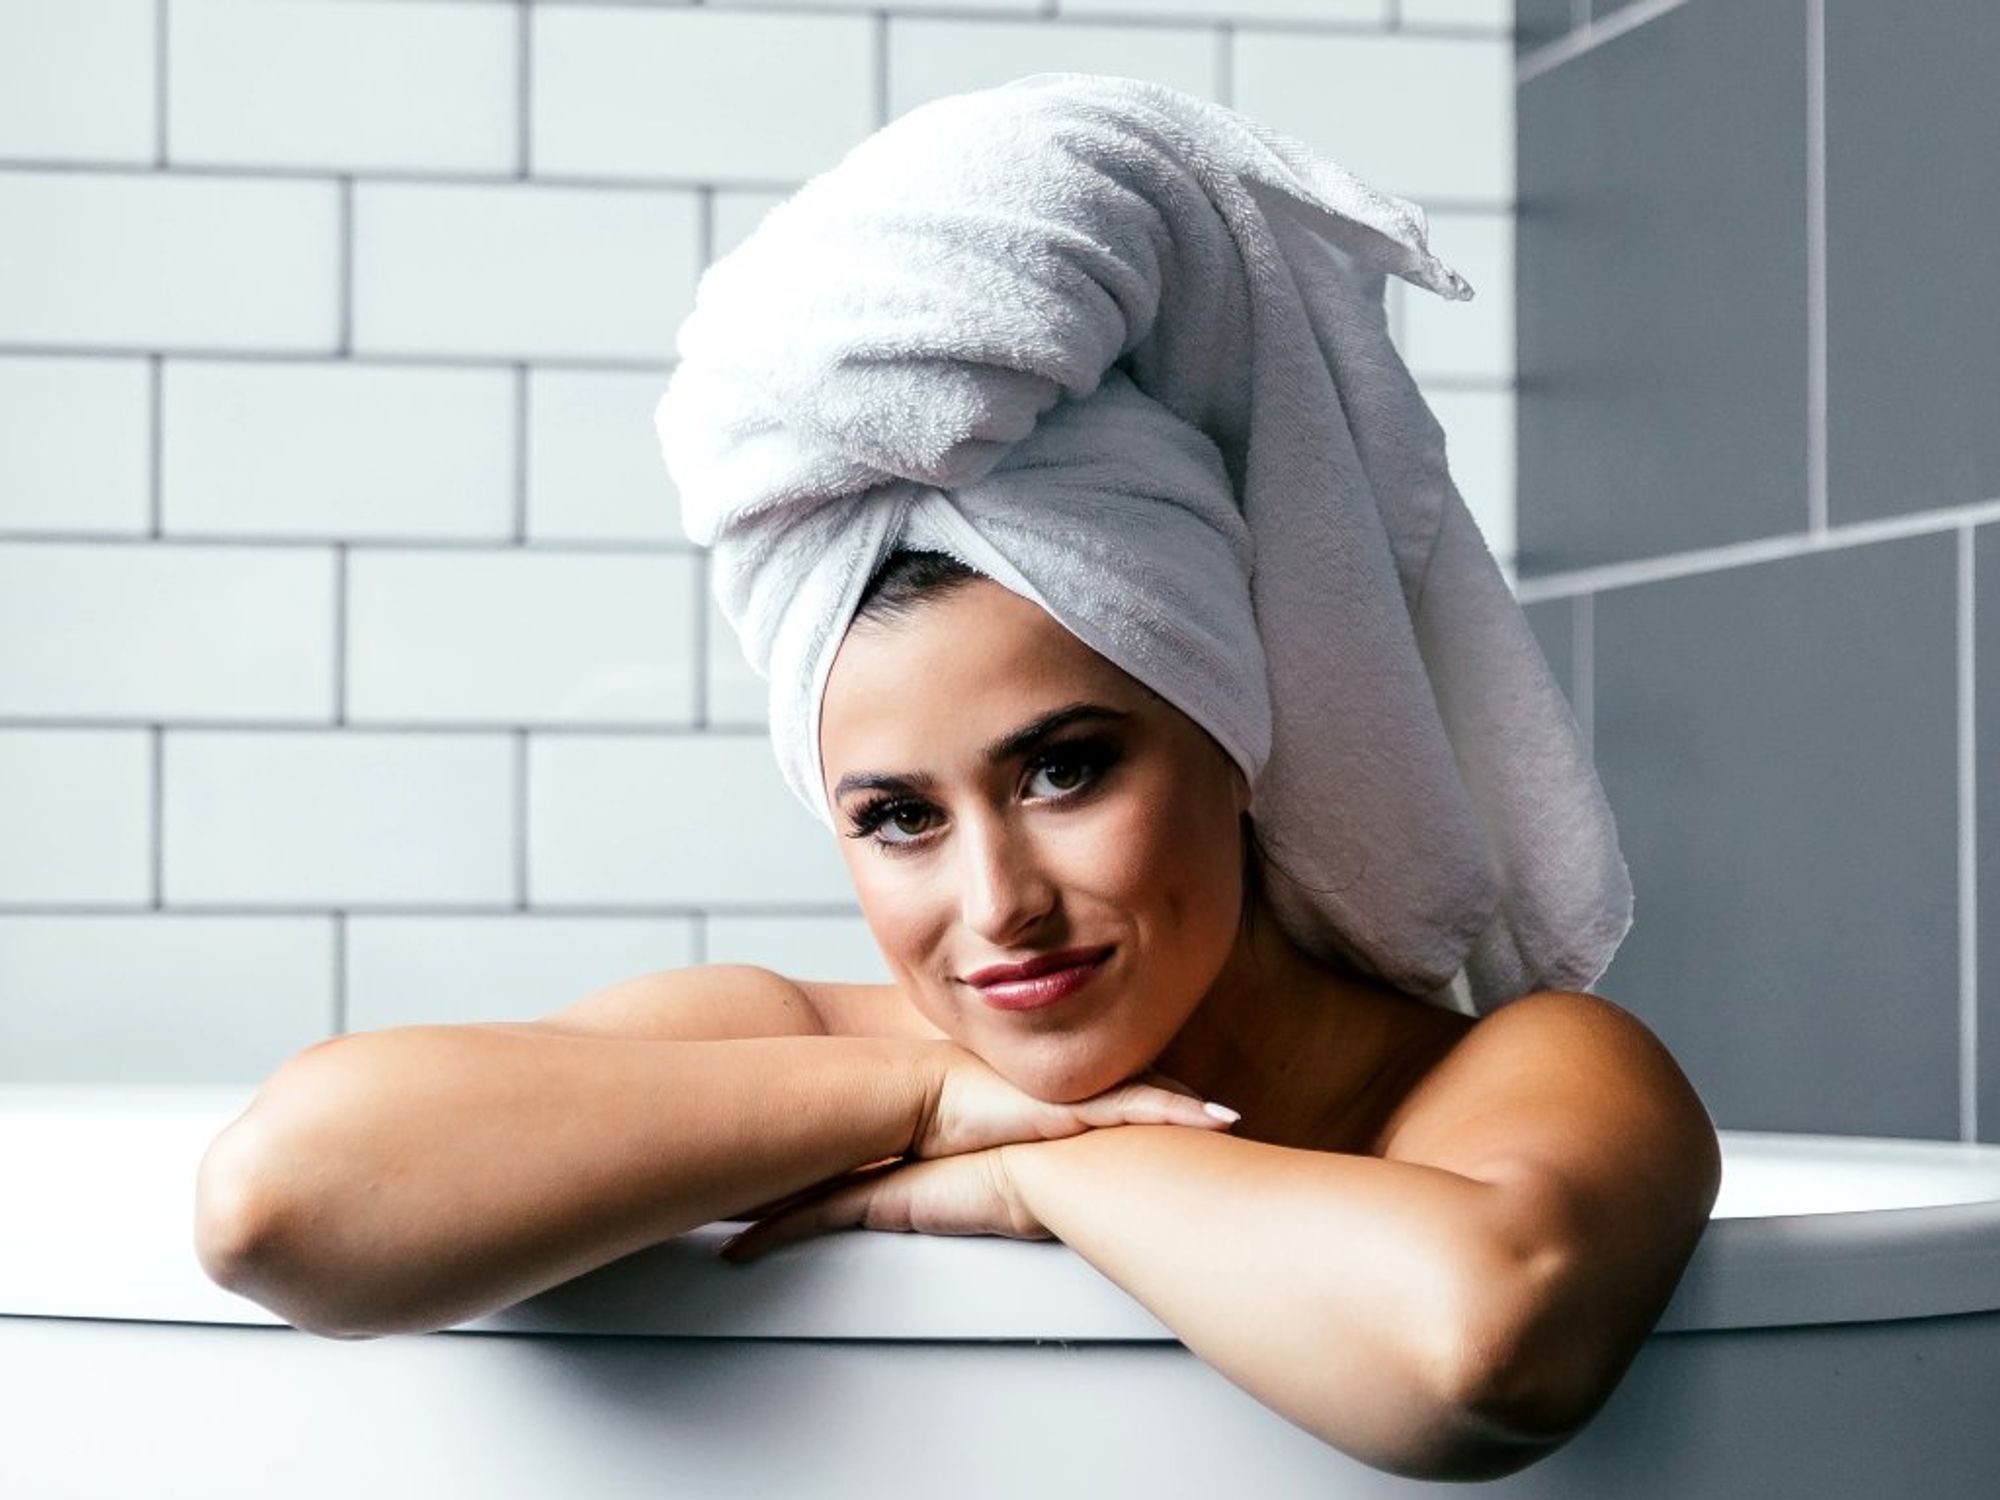 https://houston.culturemap.com/media-library/woman-in-bath-with-towel.jpg?id=33324226&width=2000&height=1500&quality=85&coordinates=0%2C0%2C0%2C0